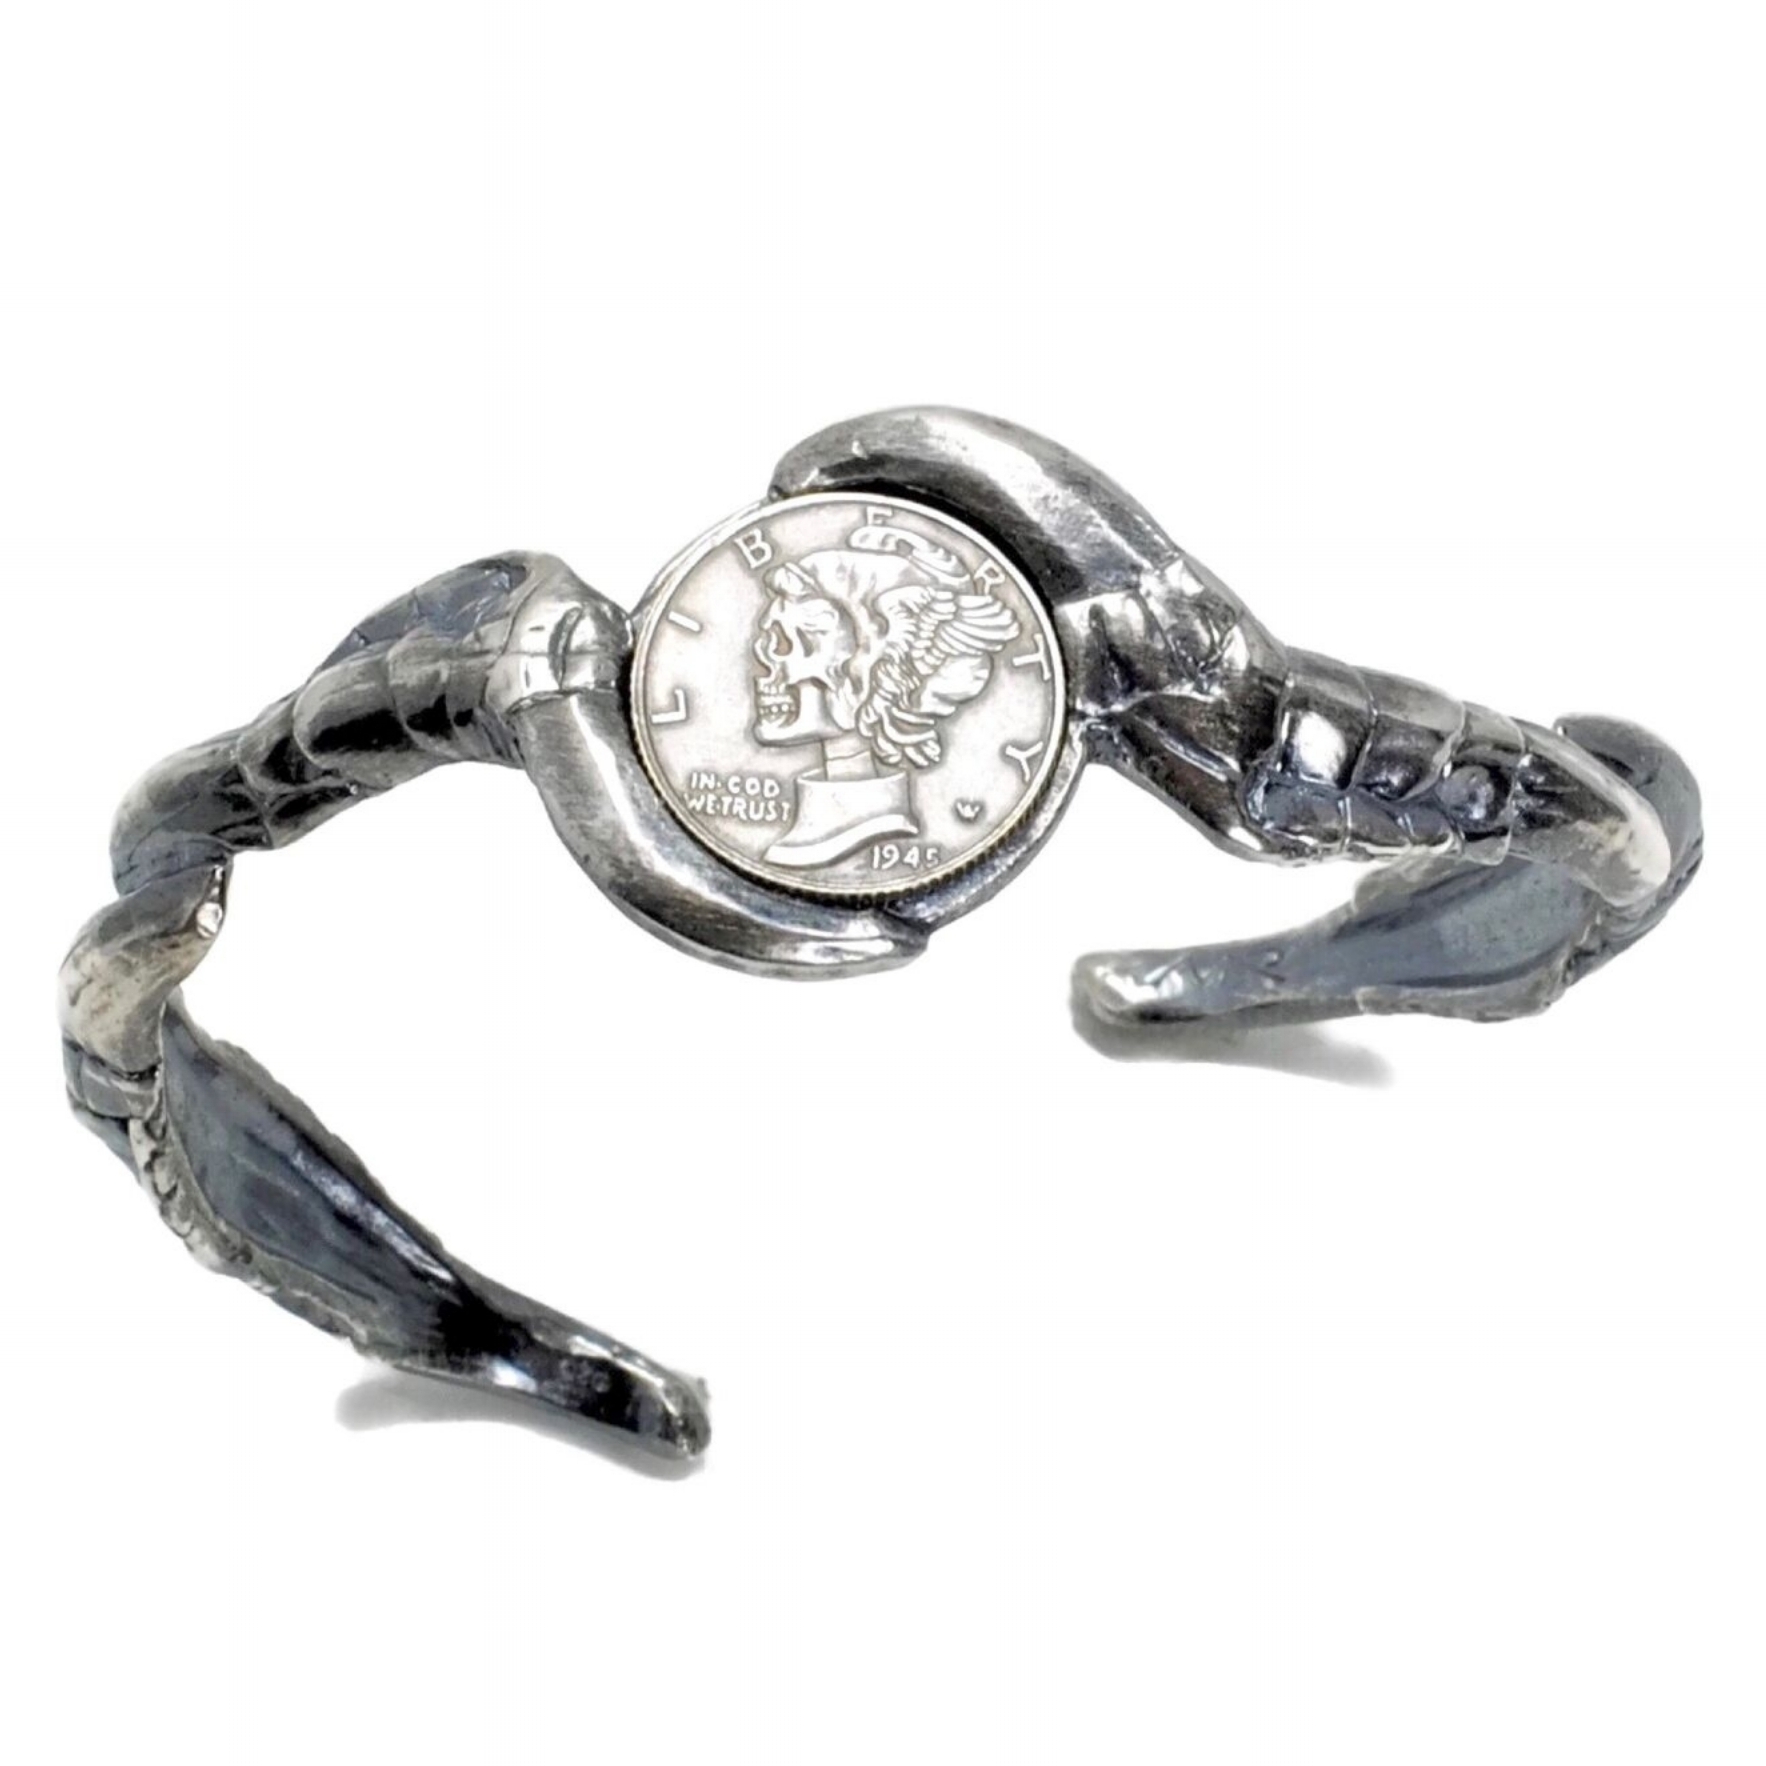 Mercury Hobo Dime Sterling Silver Set in a Sterling Silver Alligator Toe Cuff   1_preview.jpeg